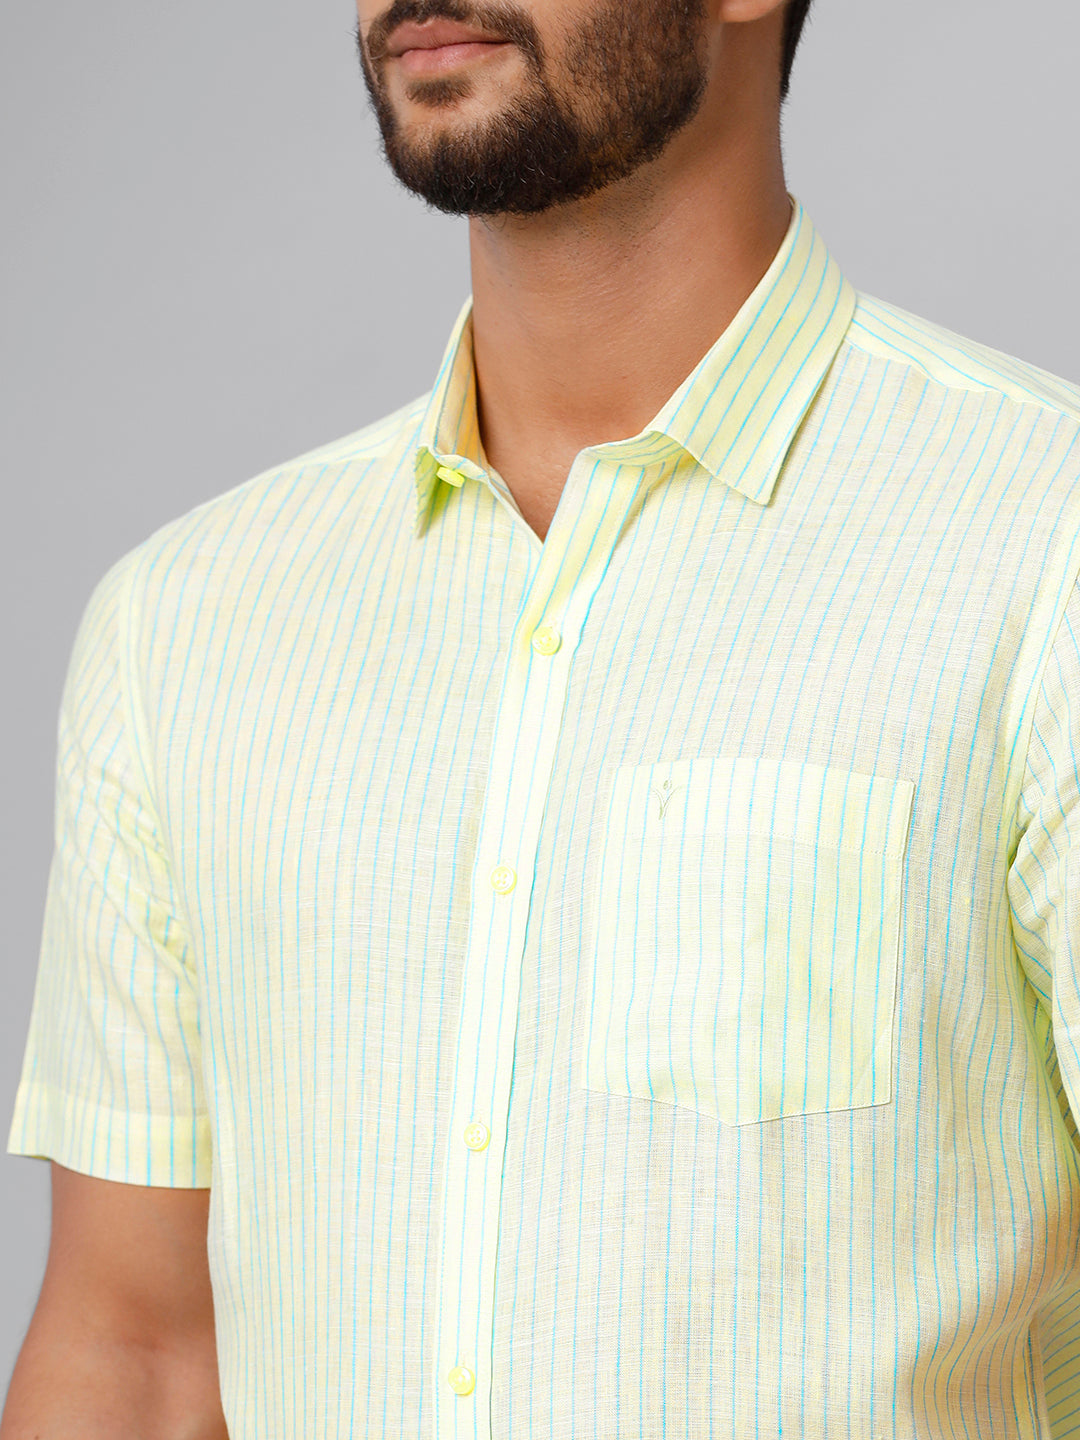 Mens Pure Linen Striped Half Sleeves Yellow Shirt LS27-Zoom view